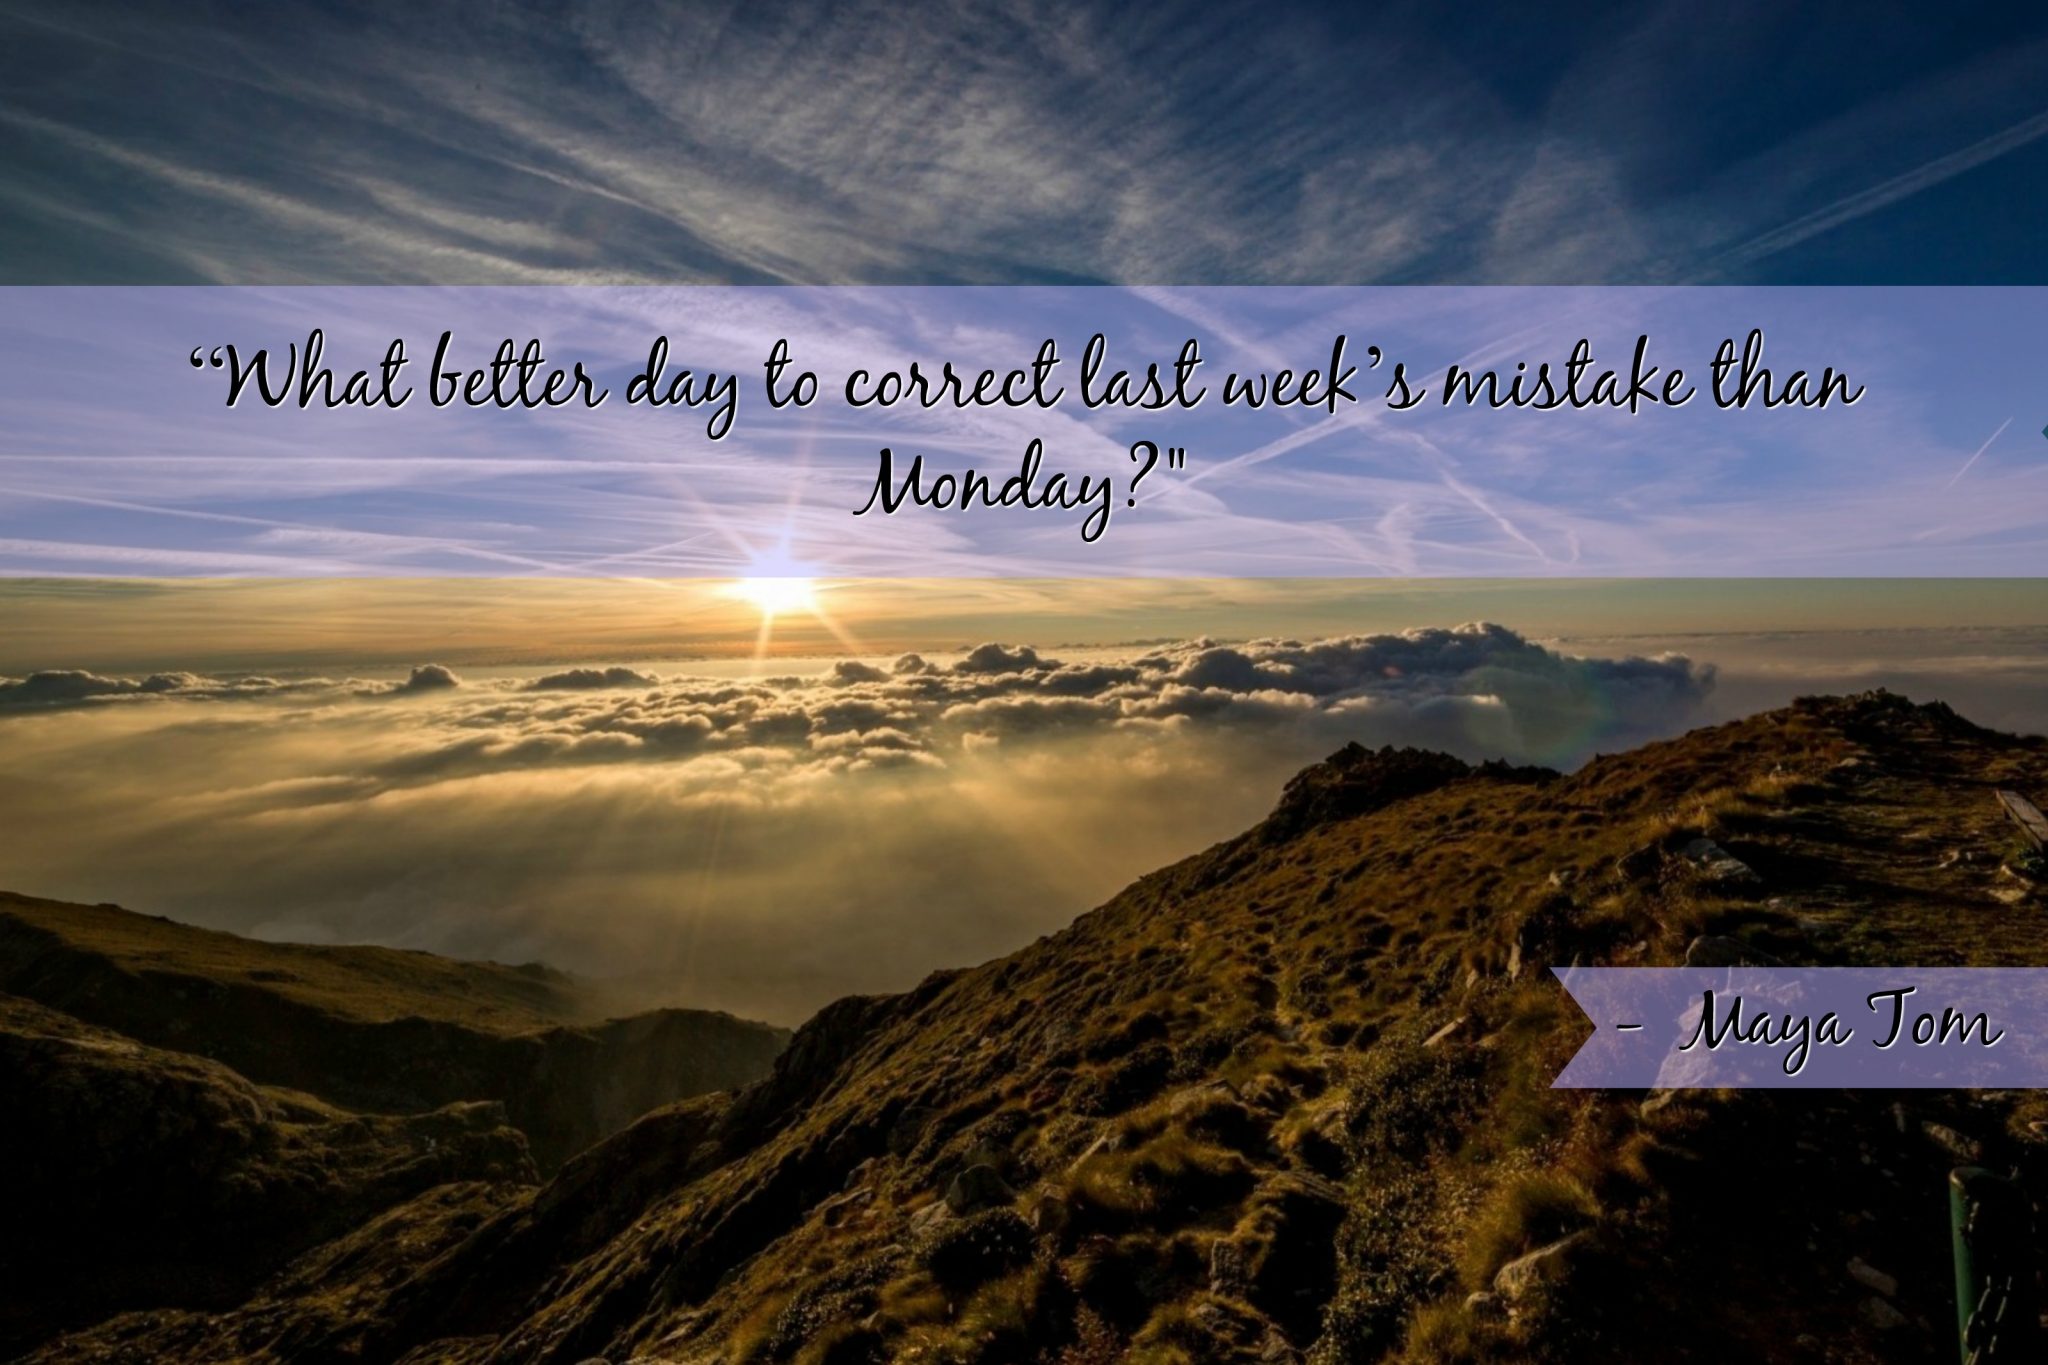 “What better day to correct last week’s mistake than Monday?" - Maya Tom